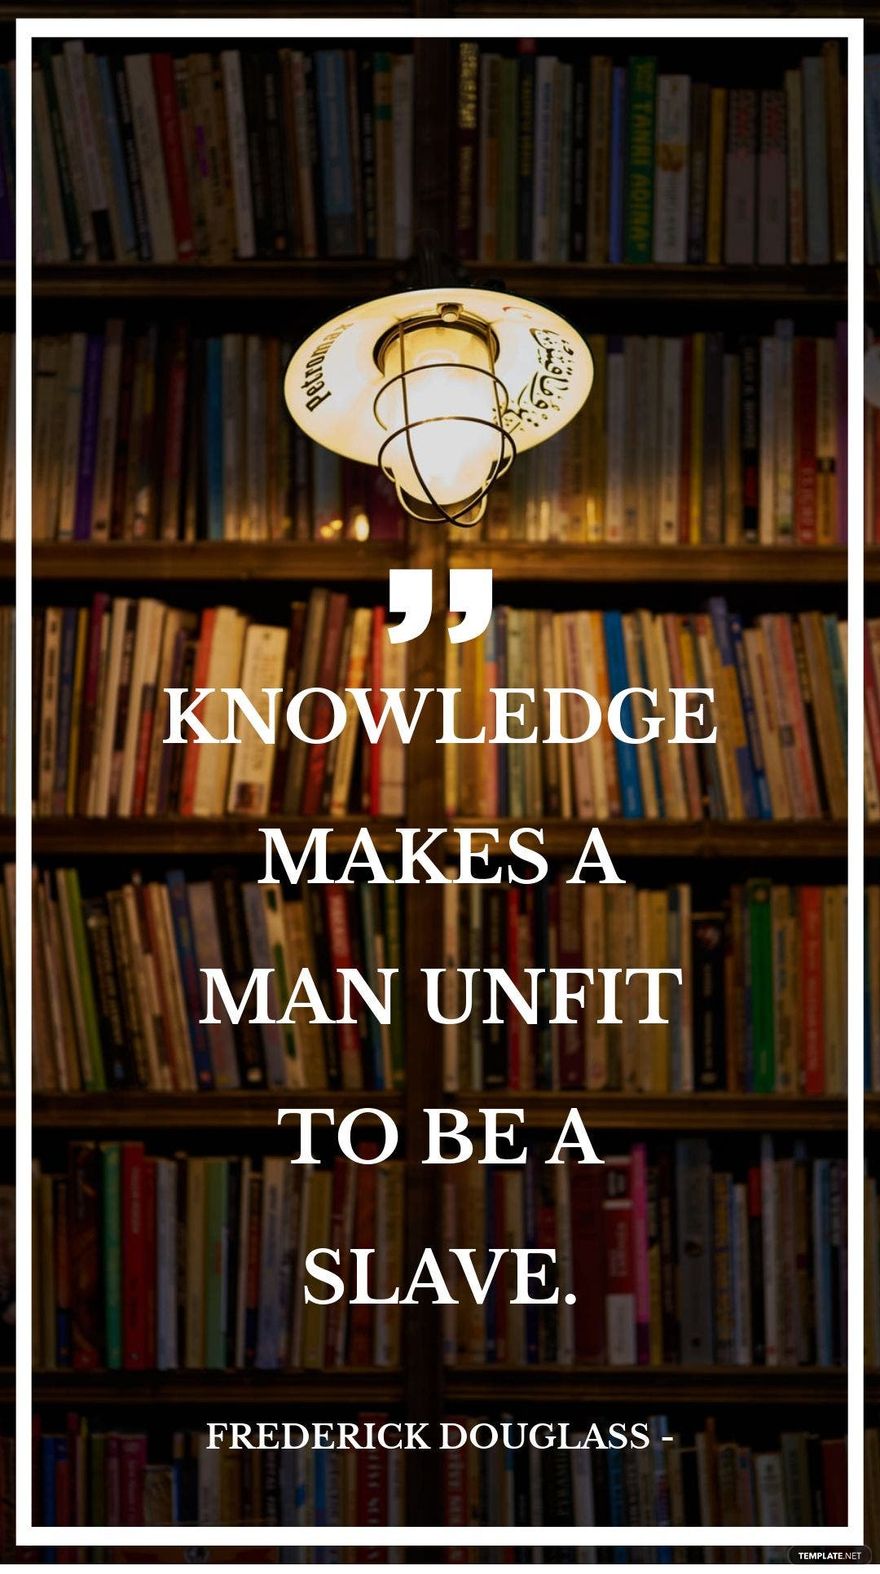 Frederick Douglass - Knowledge makes a man unfit to be a slave. in JPG